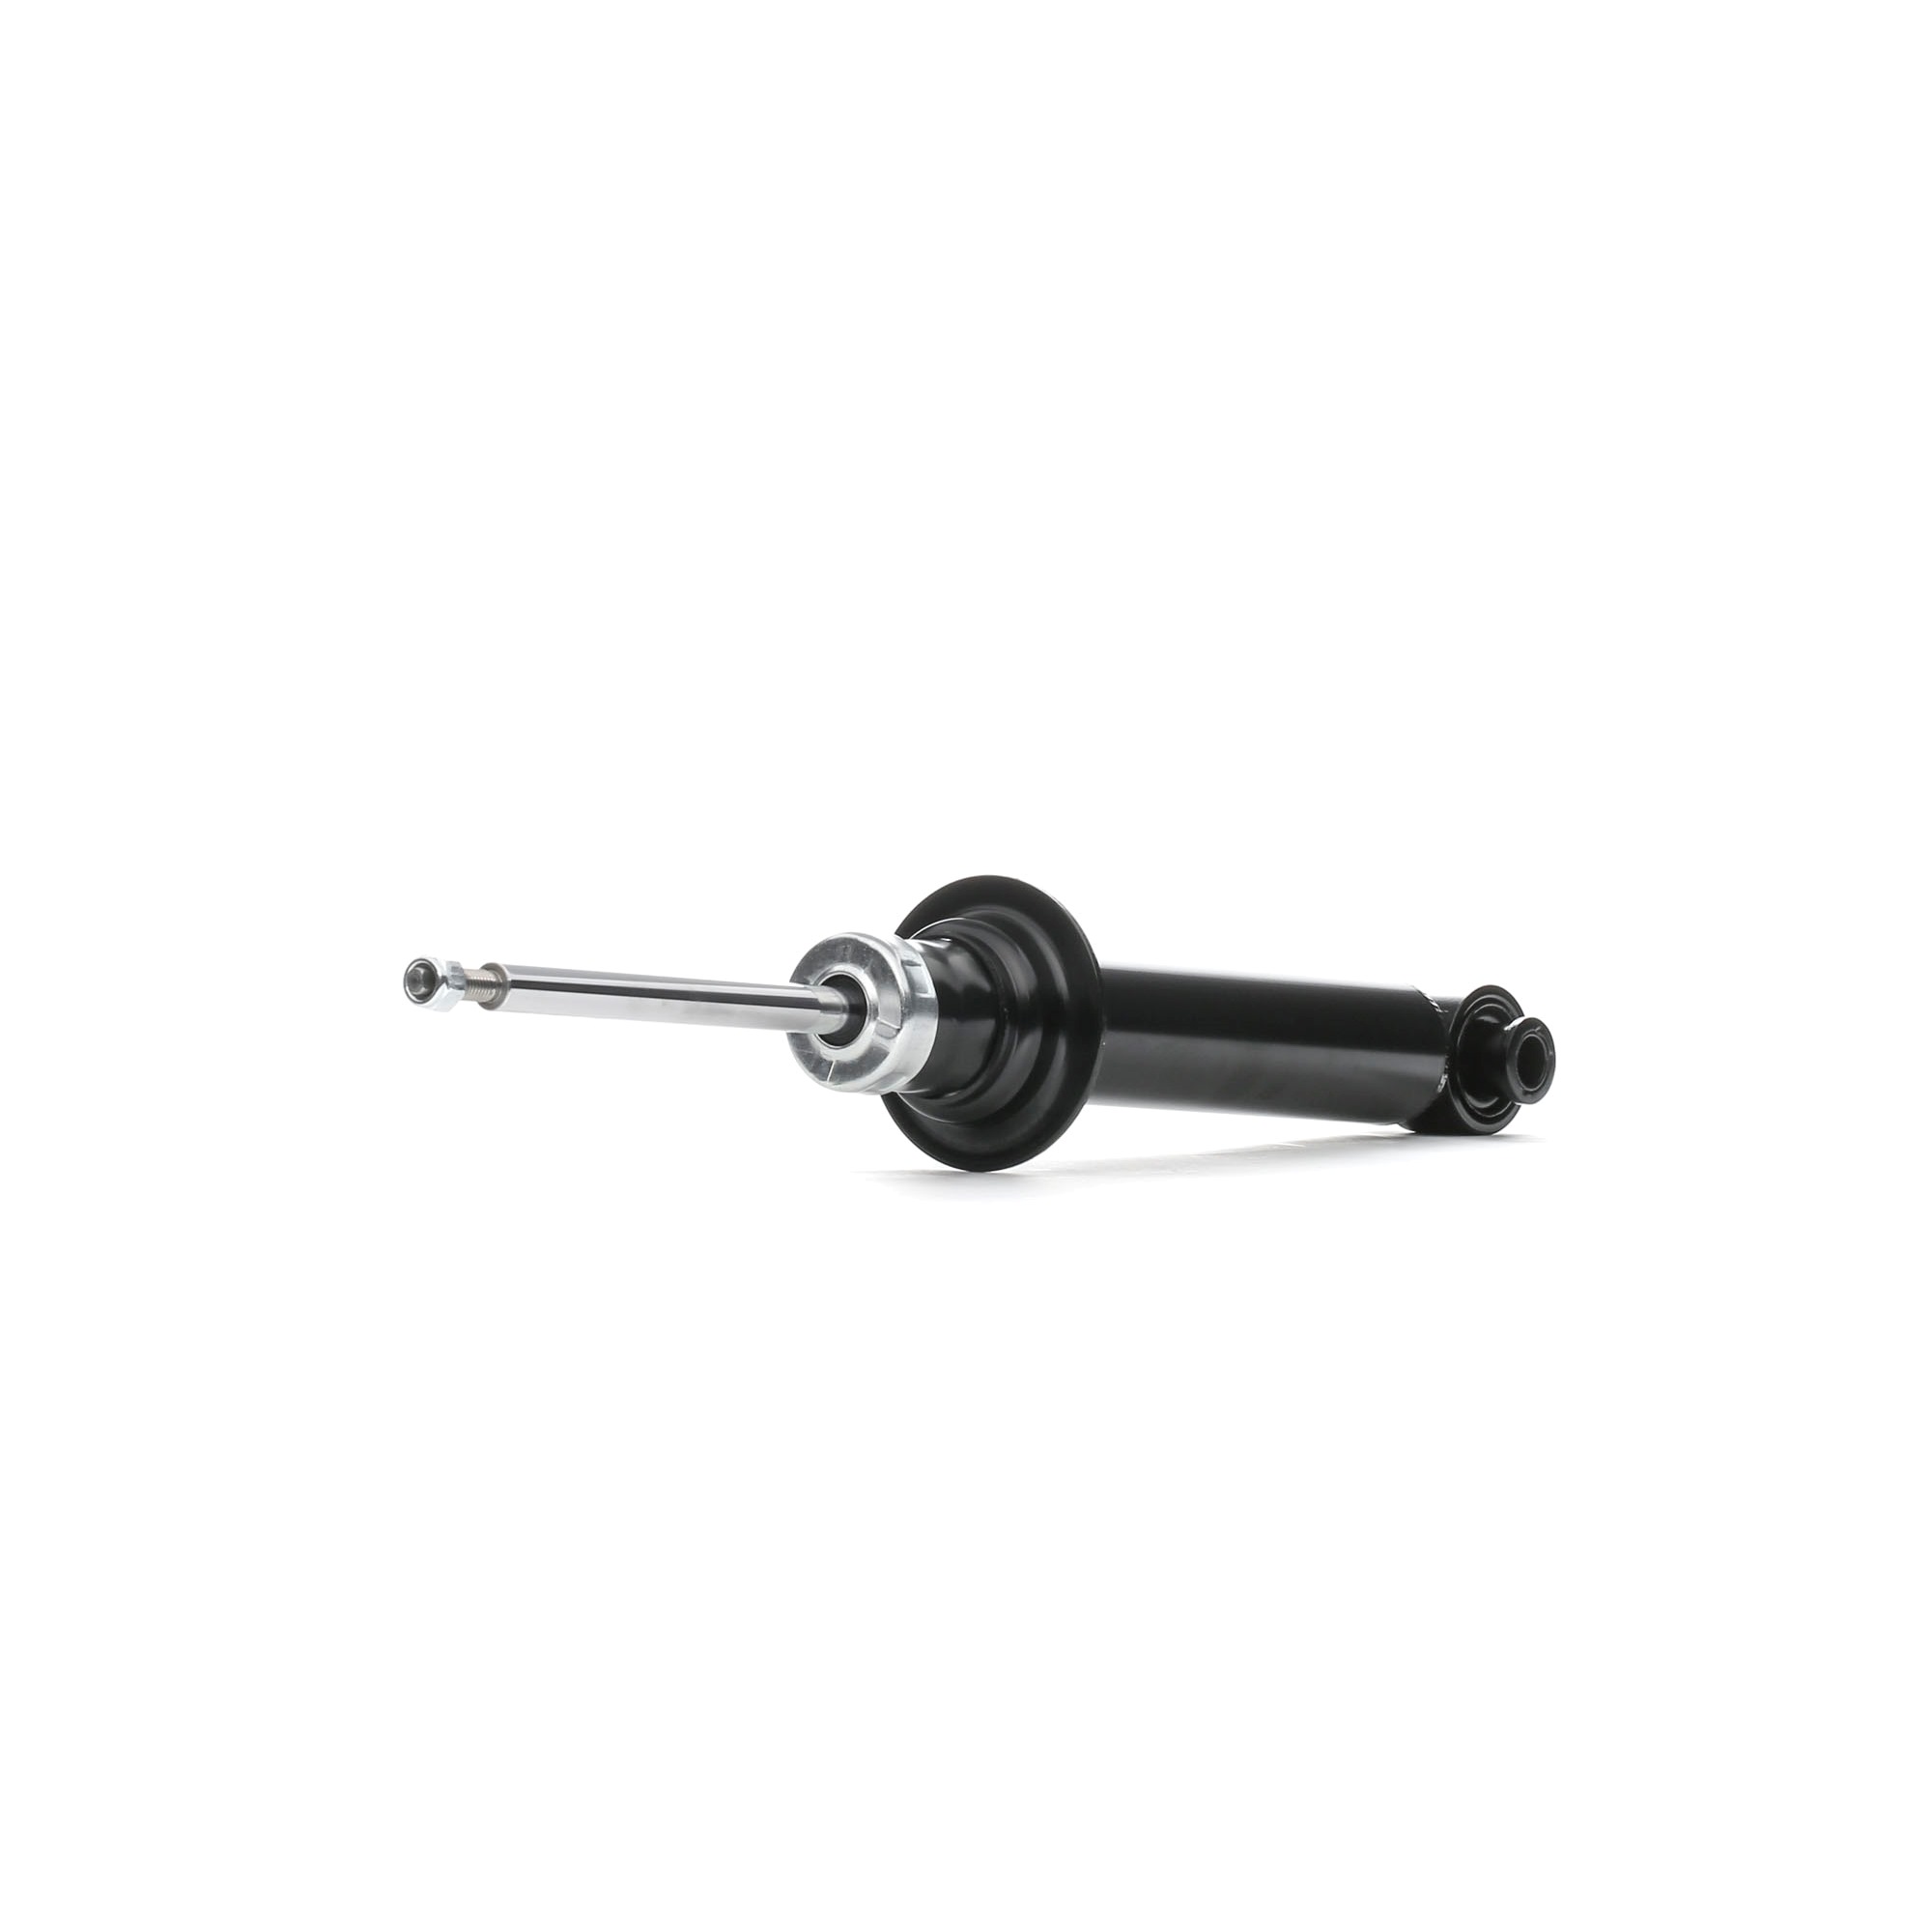 RIDEX 854S0598 Shock absorber Front Axle, Gas Pressure, 517x350 mm, Twin-Tube, Telescopic Shock Absorber, Top pin, Bottom eye